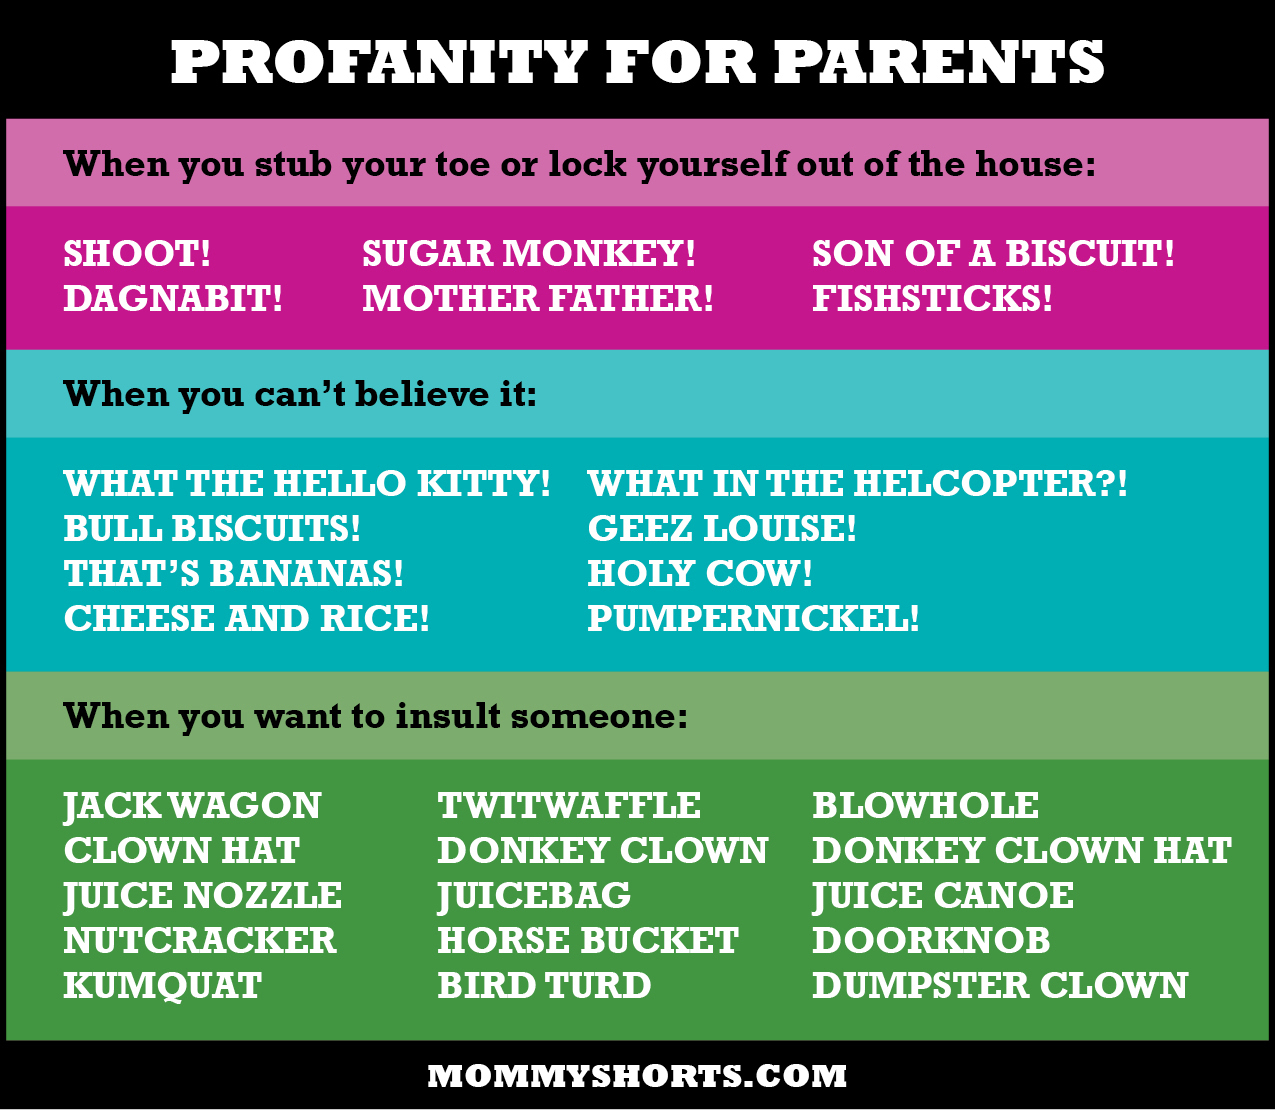 Profanity for Parents